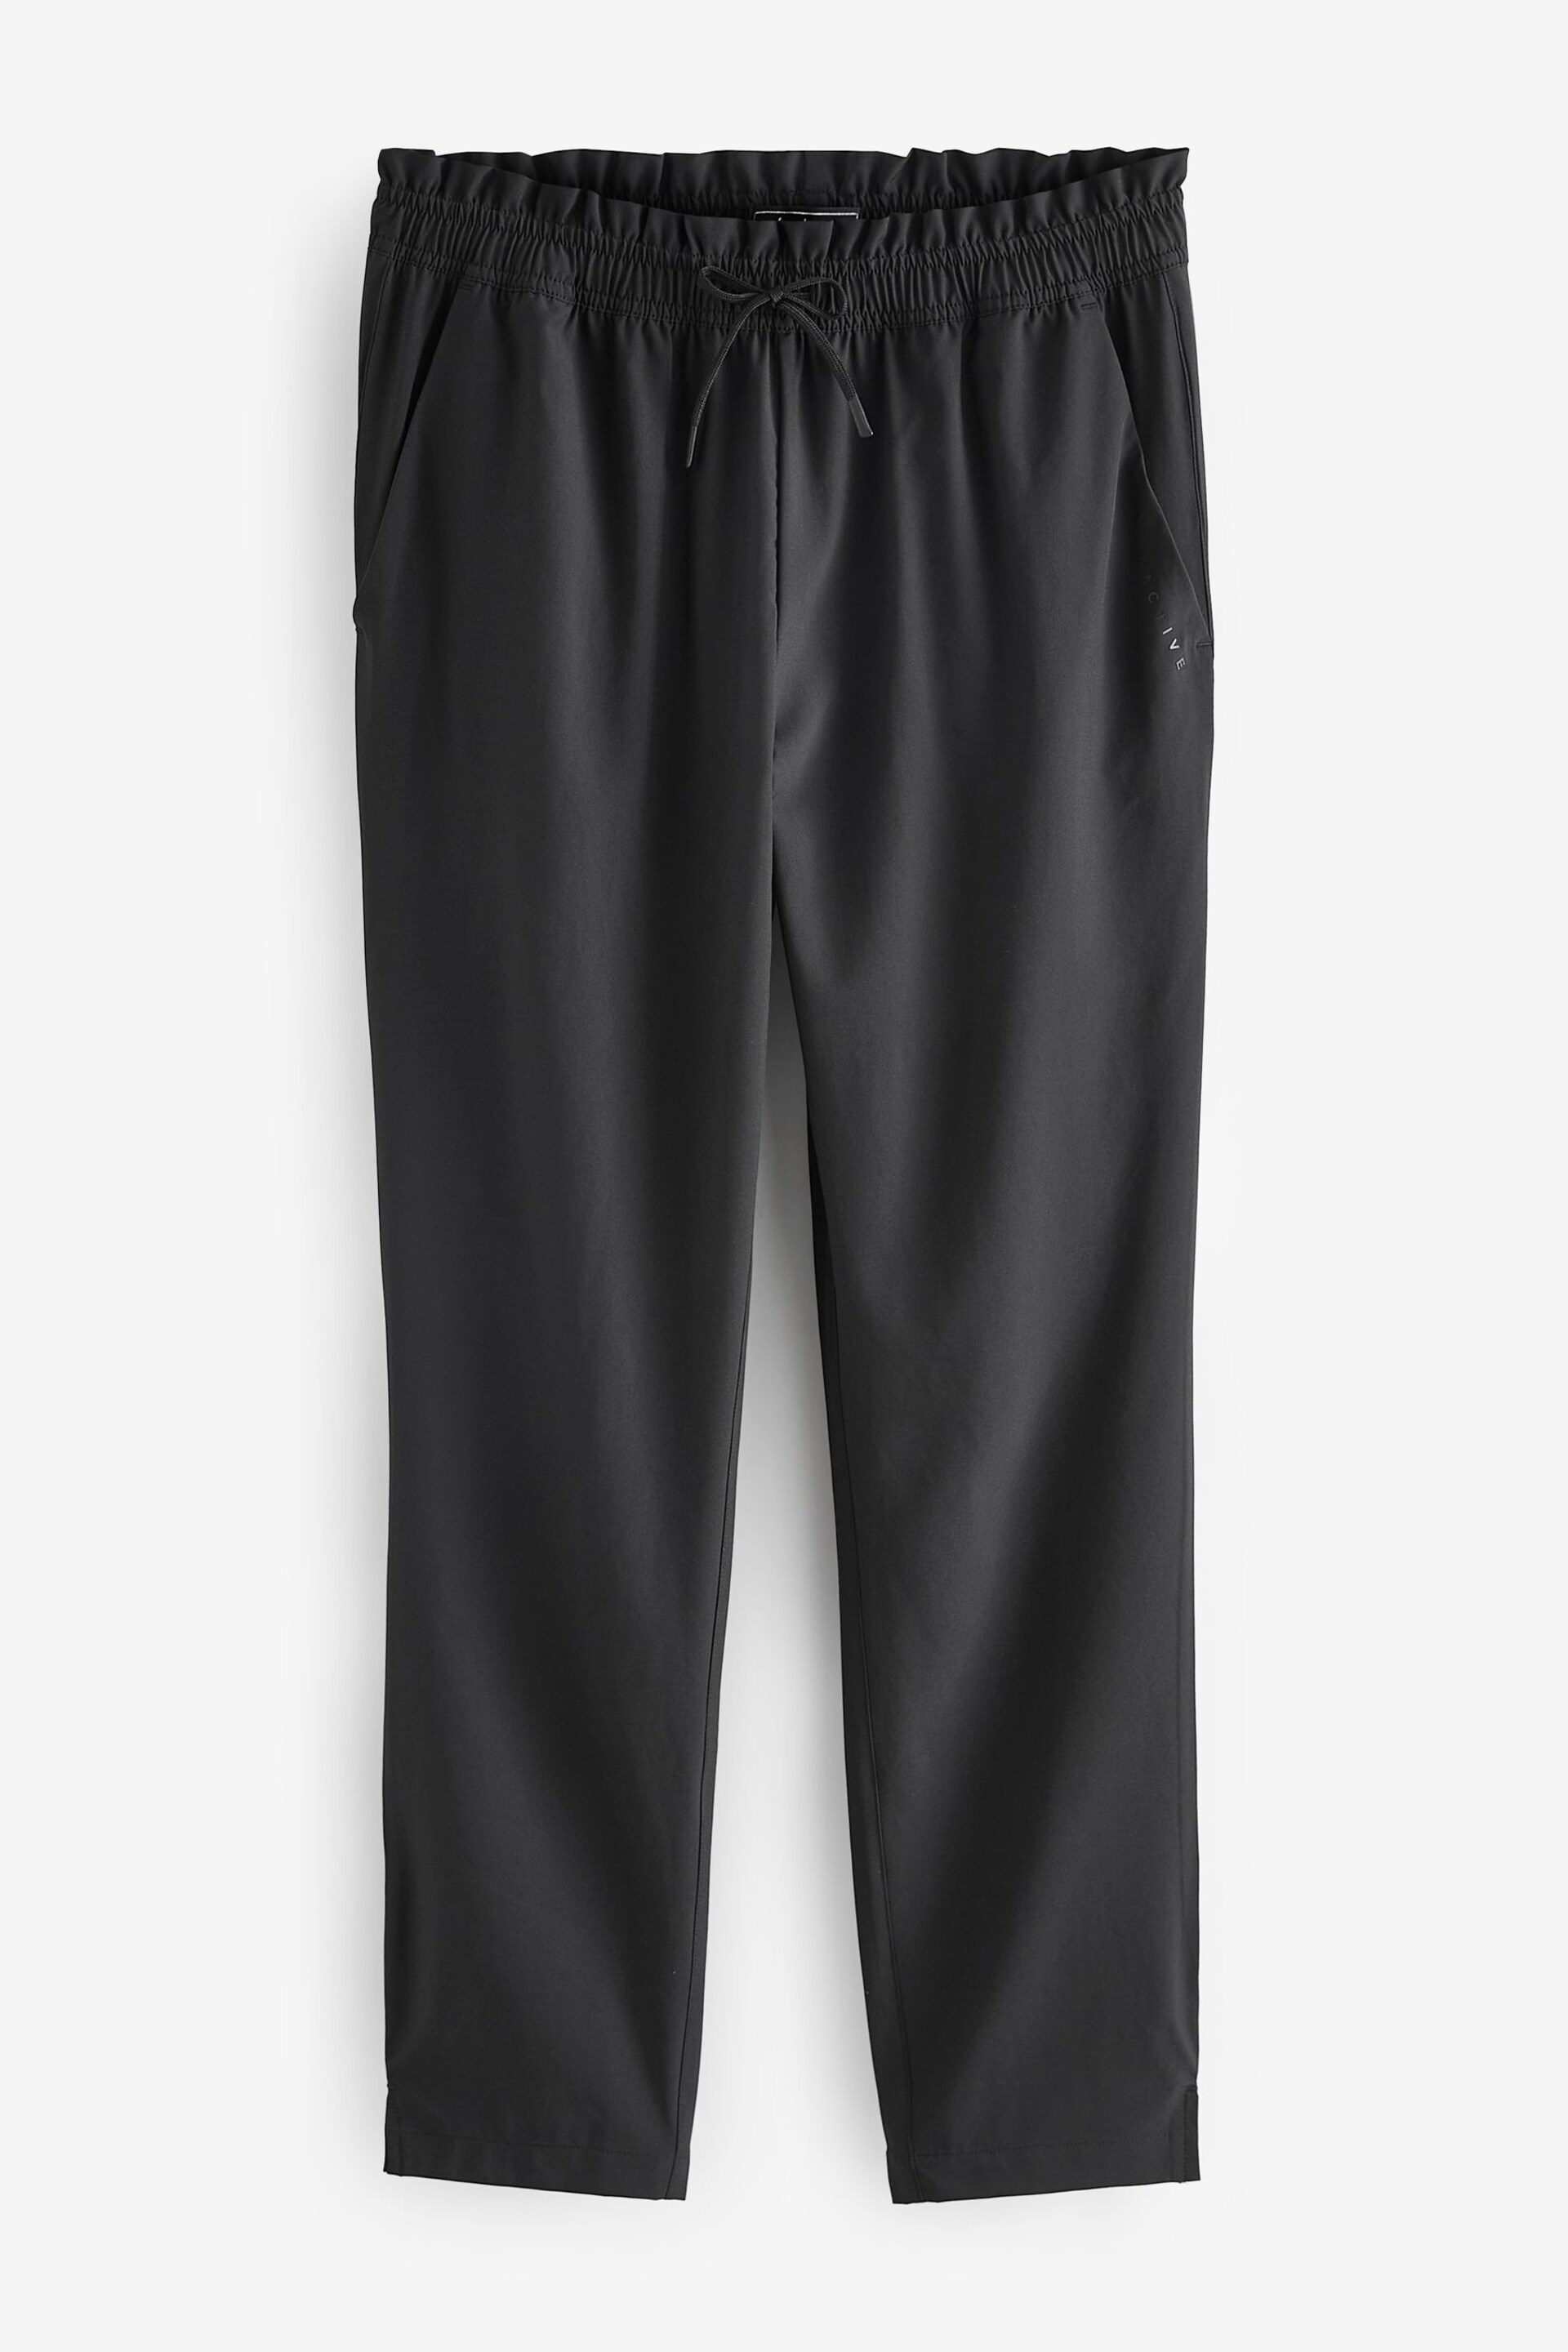 Black Active Walking Trousers - Image 6 of 7